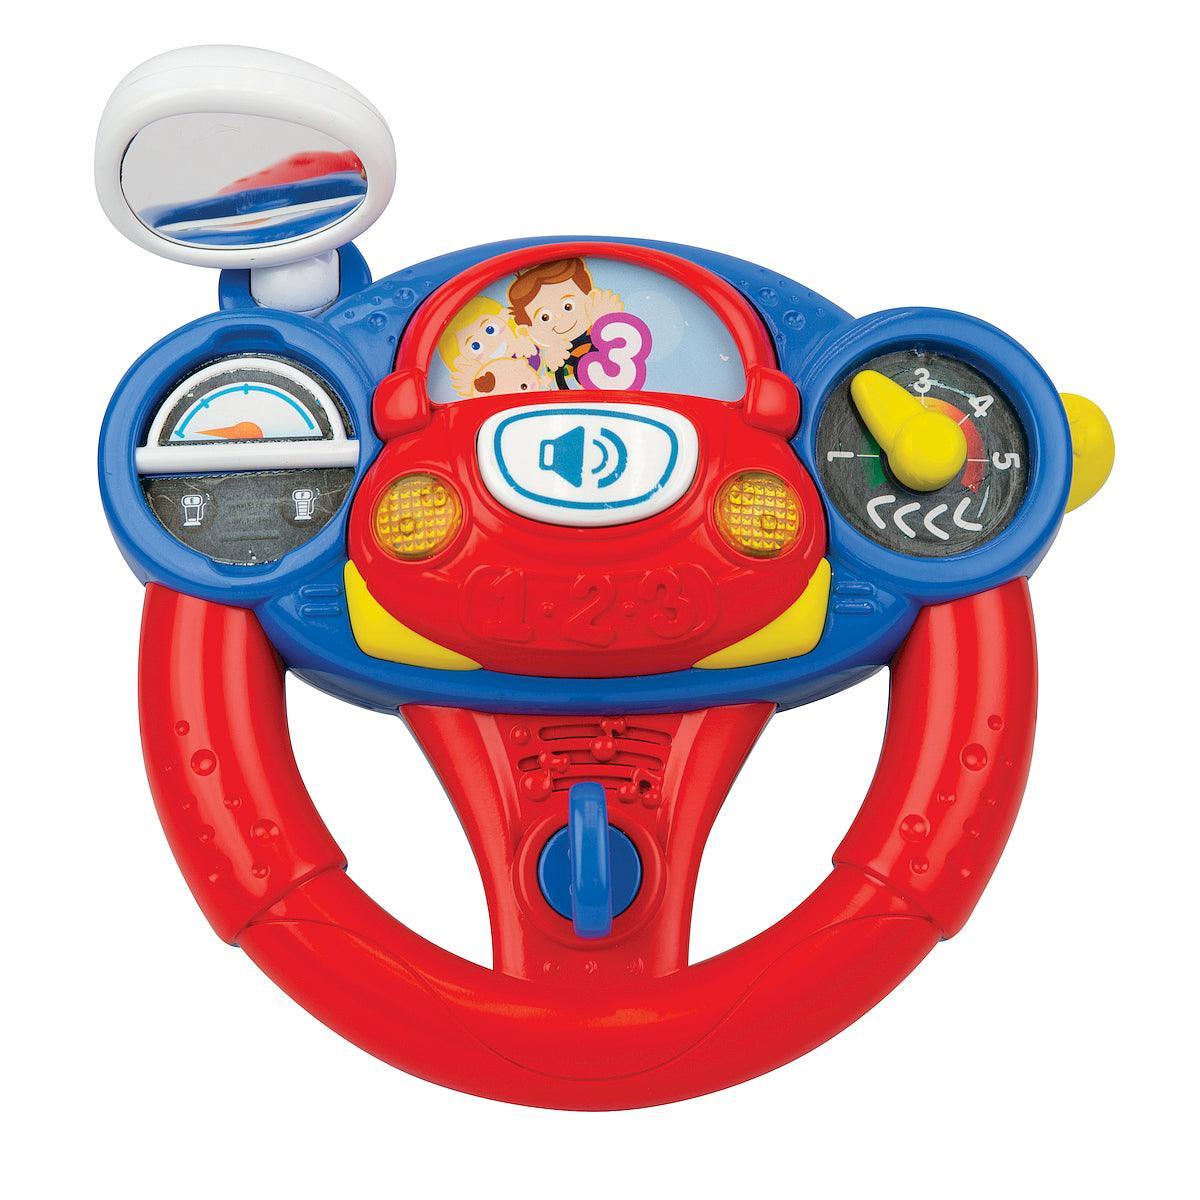 WinFun Lil’ Learner Driver - BumbleToys - 2-4 Years, 6M+, Boys, Cecil, Girls, Pretend Play